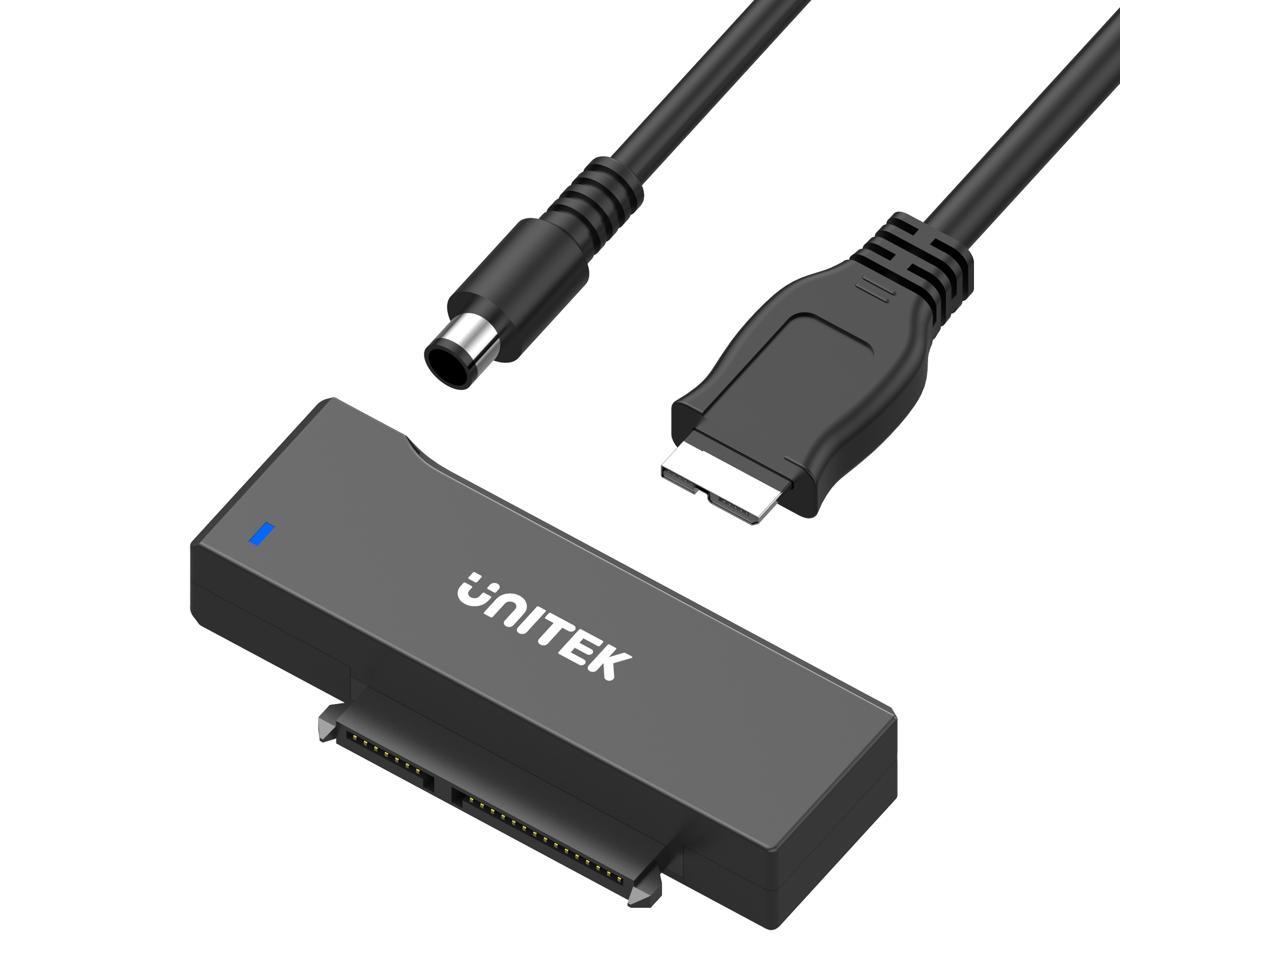 Re-paste The beach Key Unitek SATA to USB 3.0, SATA III Cable Hard Drive Adapter Converter for  Universal 2.5/3.5 SATA HDD/SSD Hard Drive Disk, Include 12V/2A Power Adapter  (Black) - Newegg.com